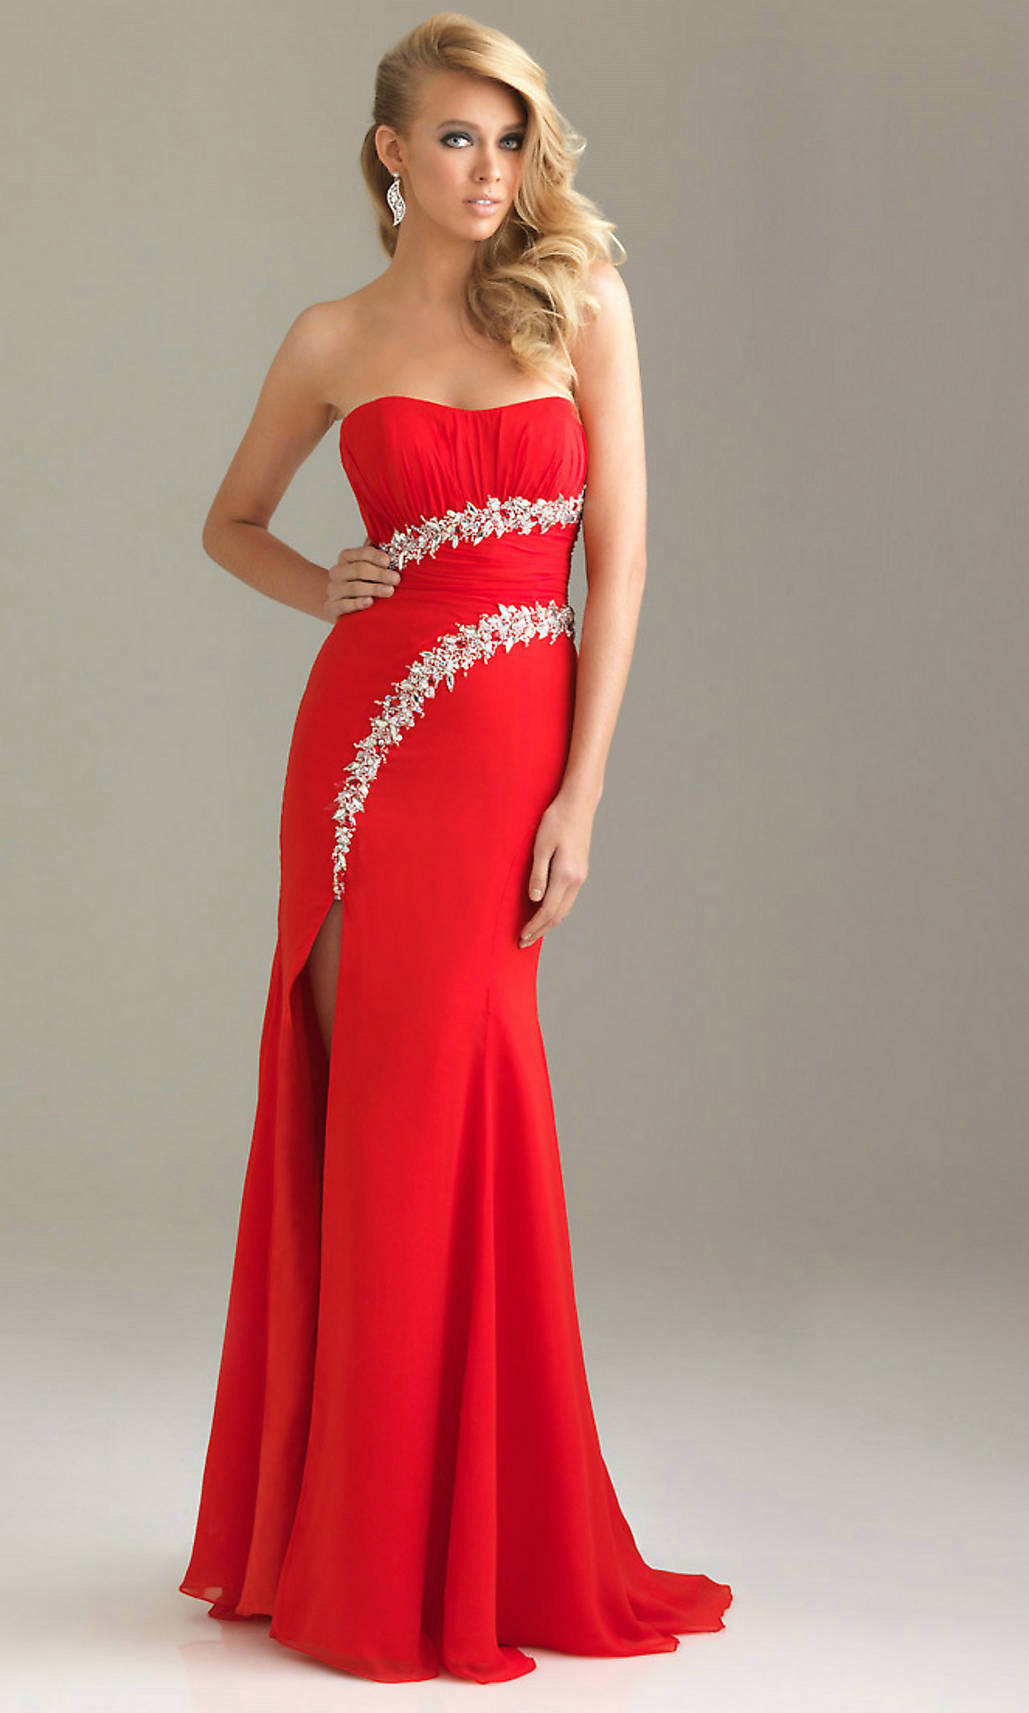 22 LOVELY RED PROM DRESSES FOR THE BEAUTIFUL EVENINGS..... Godfather